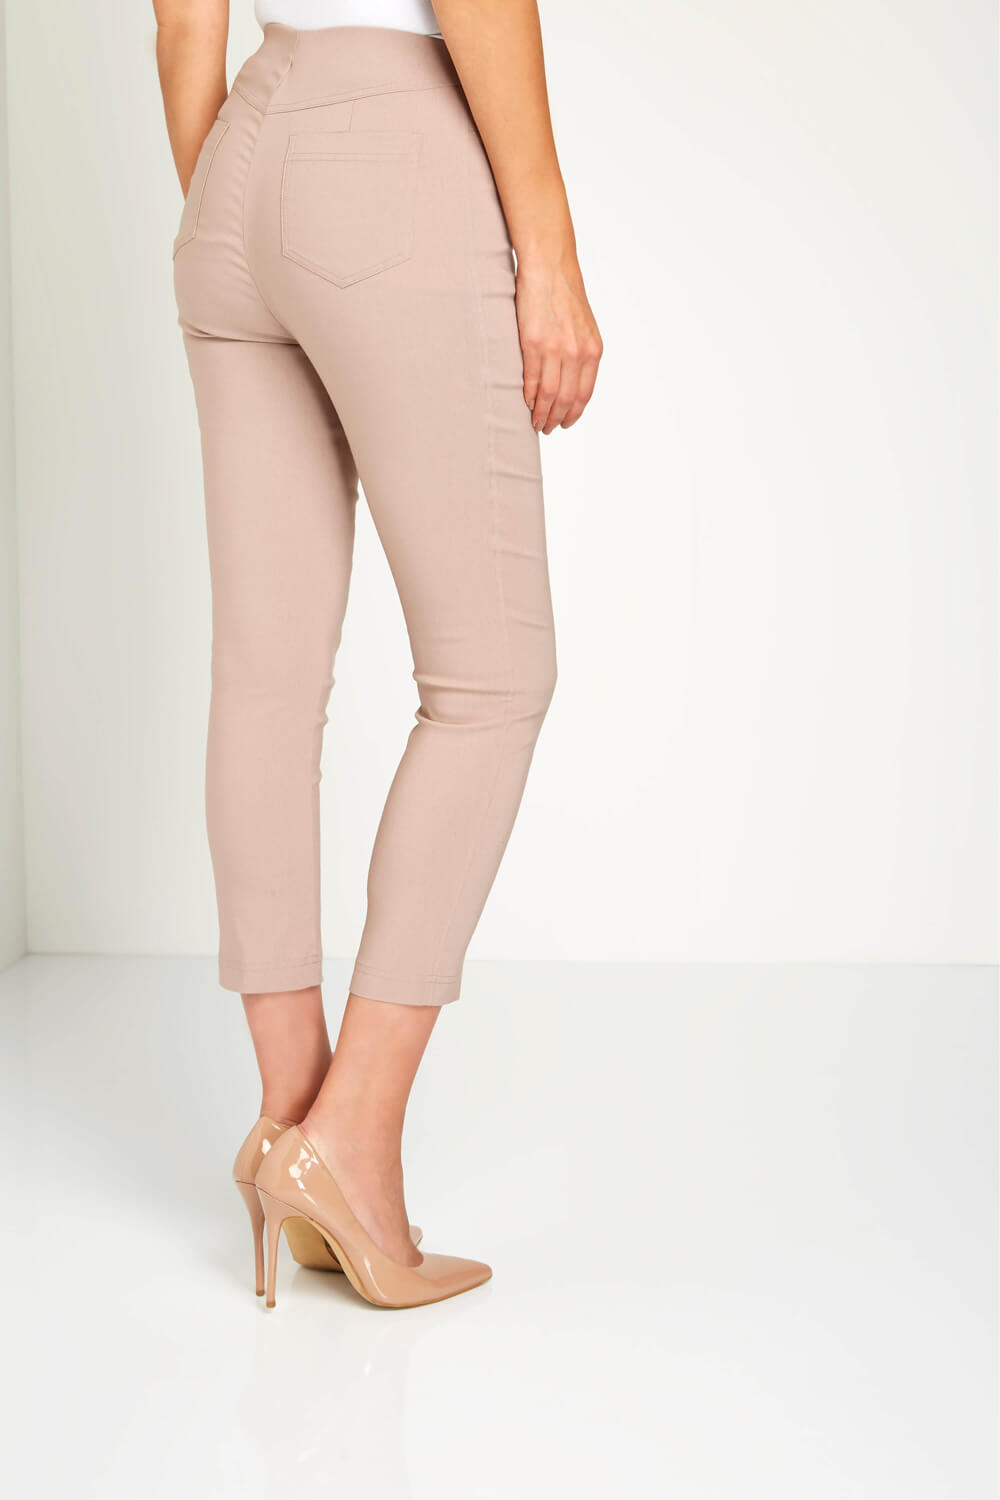 Taupe 3/4 Length Stretch Trouser, Image 2 of 4